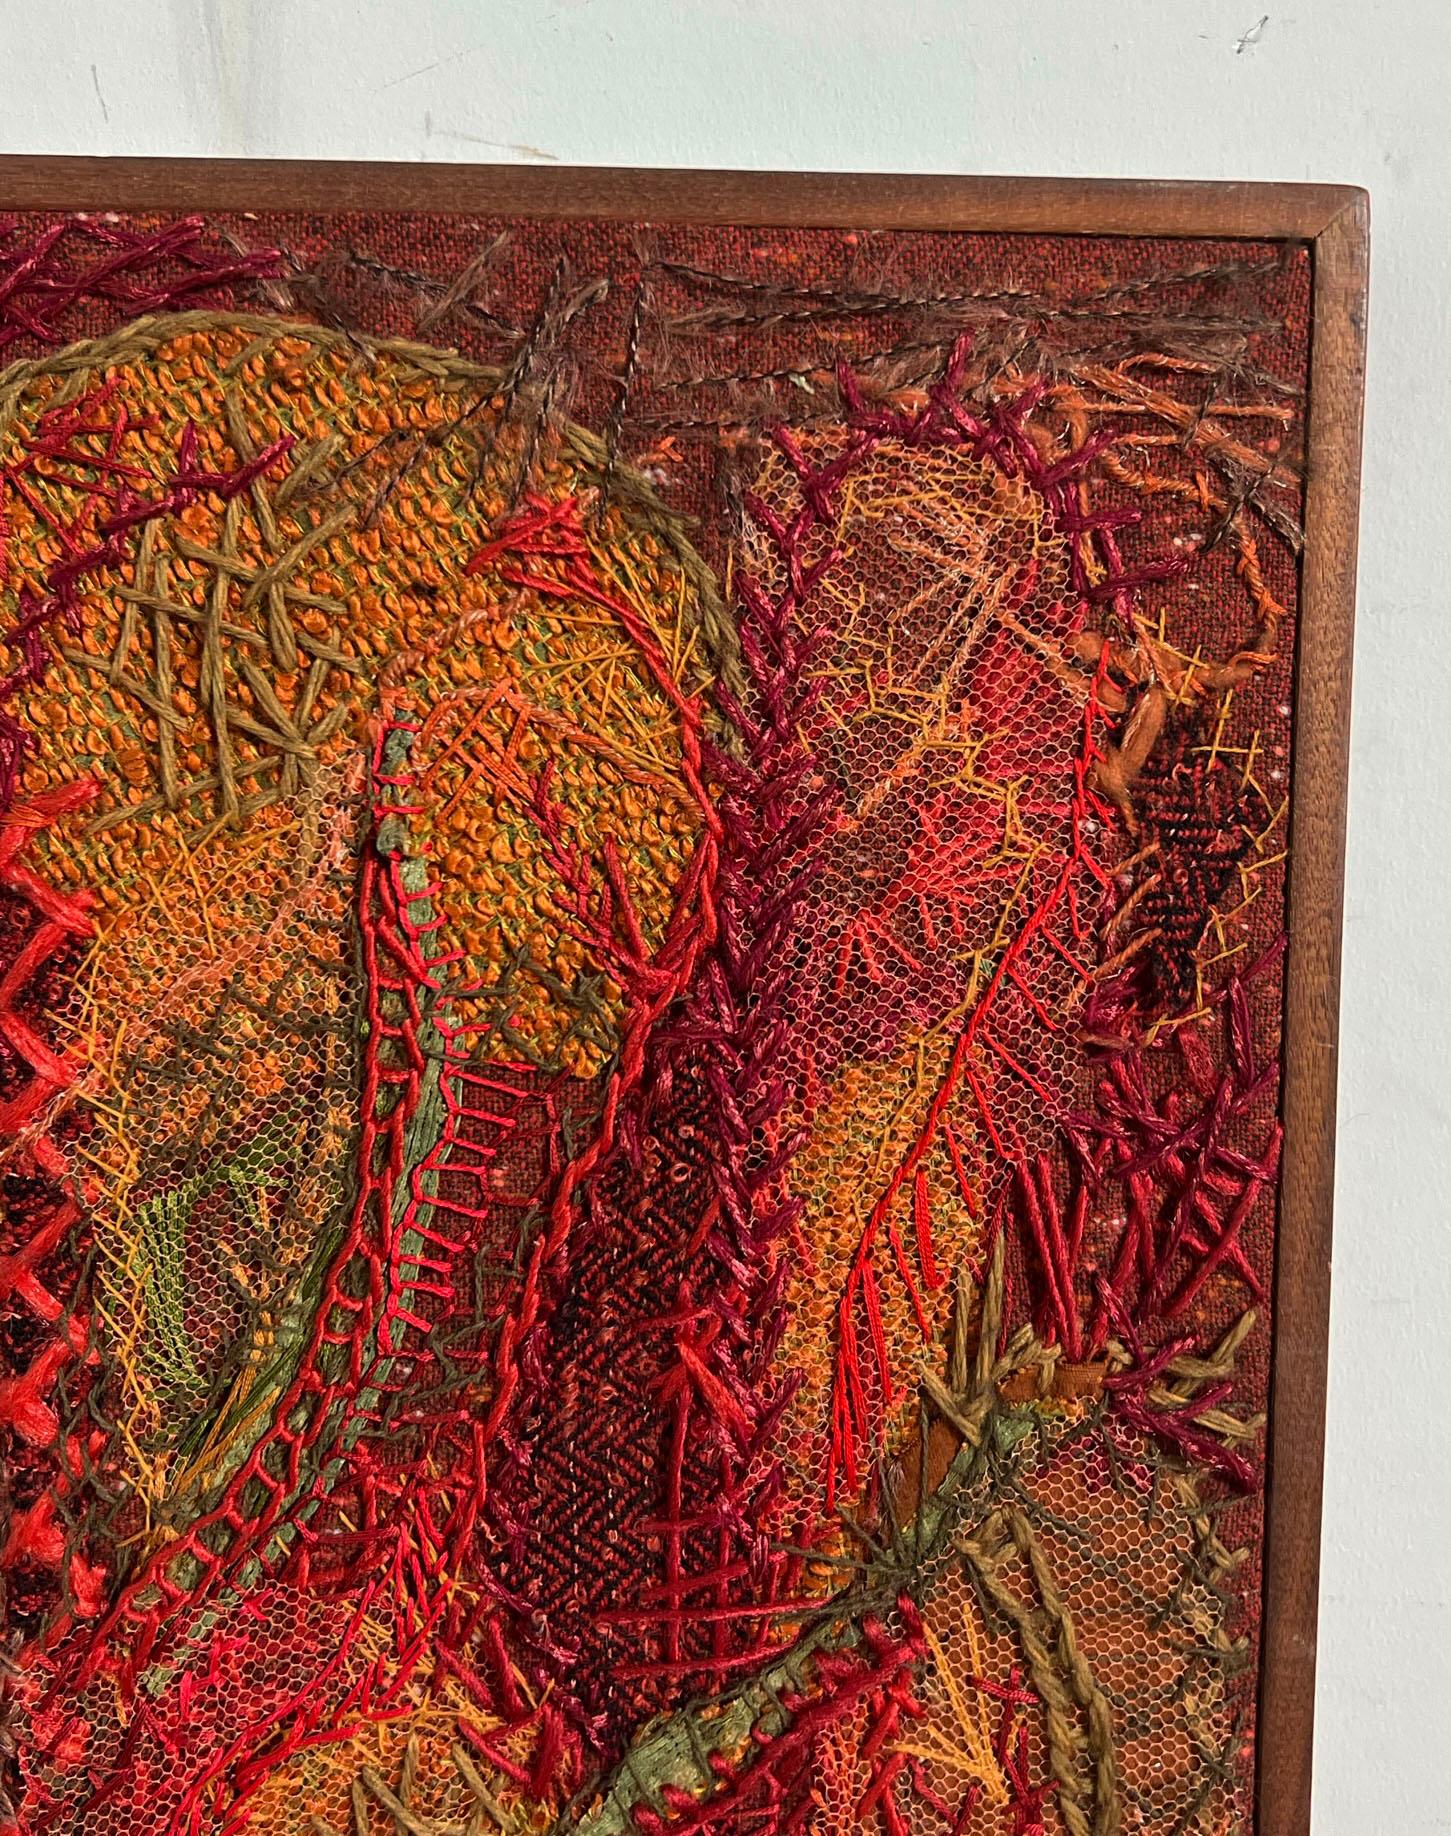 Abstract fiber art panel titled “Summer is Gone” by the painter and textile artist Helen Richards of Garden Grove, CA, circa 1960s.